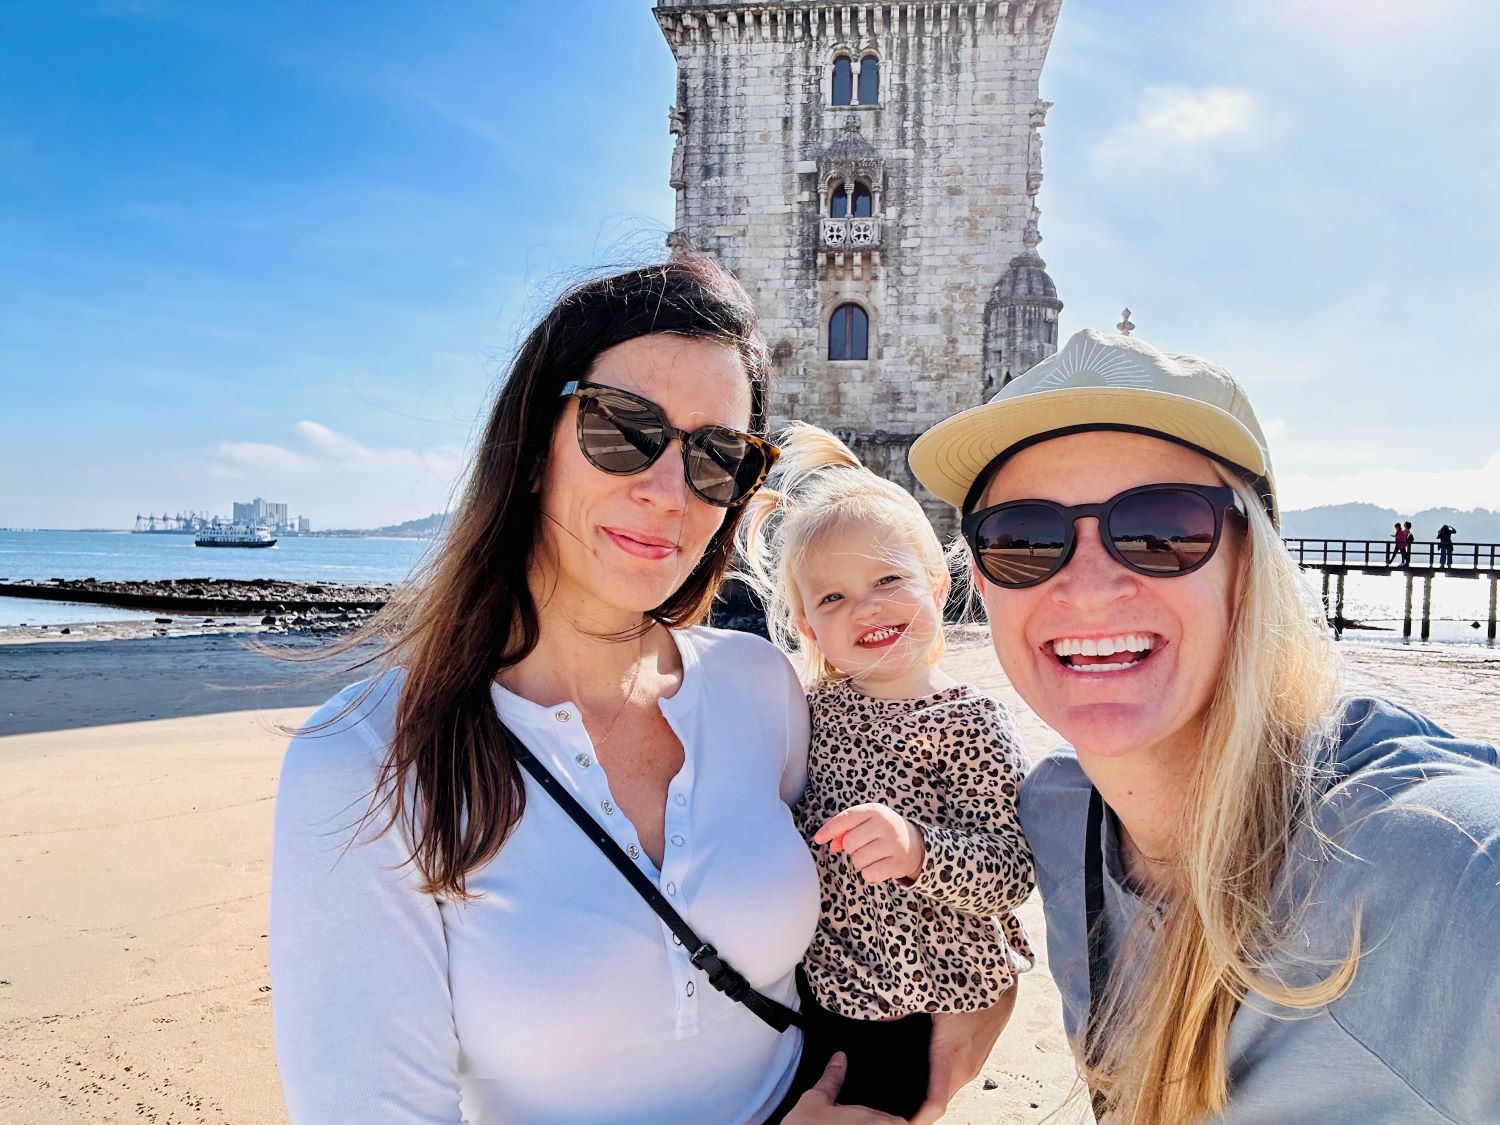 Nicole traveling with wife and daughter